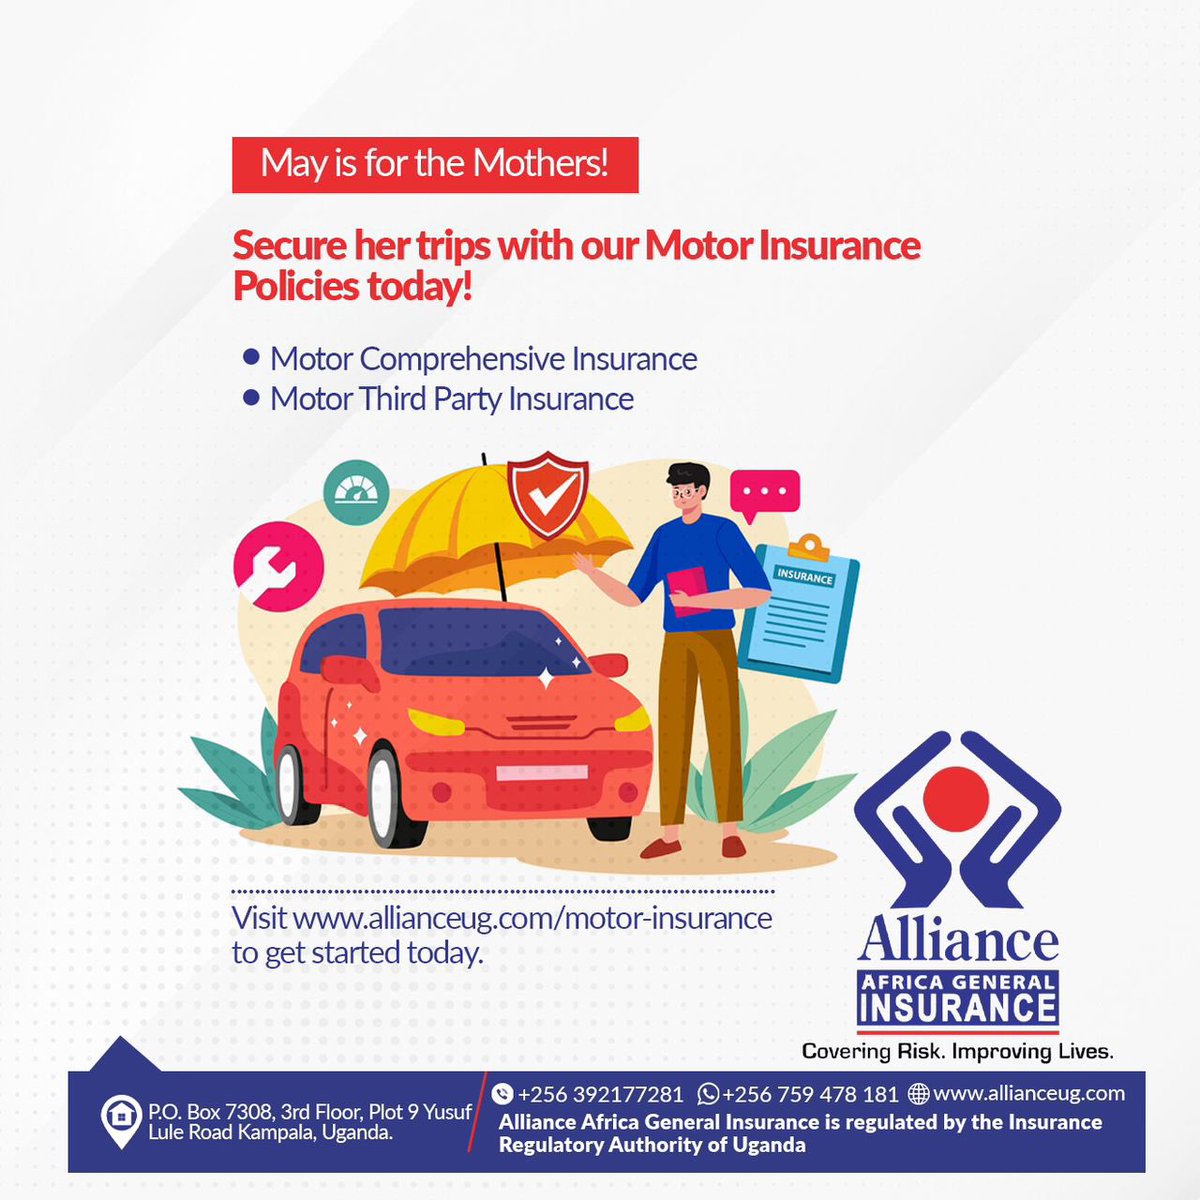 It’s Mother’s Month & yes, she deserves it all!

Take her on secured trips courtesy of our Motor Insurance Covers:
- Motor Third Party Insurance
- Comprehensive Motor Insurance

Get started today. Give us a call on 📞 0392 177 281

#MothersMonth #MothersDayGift